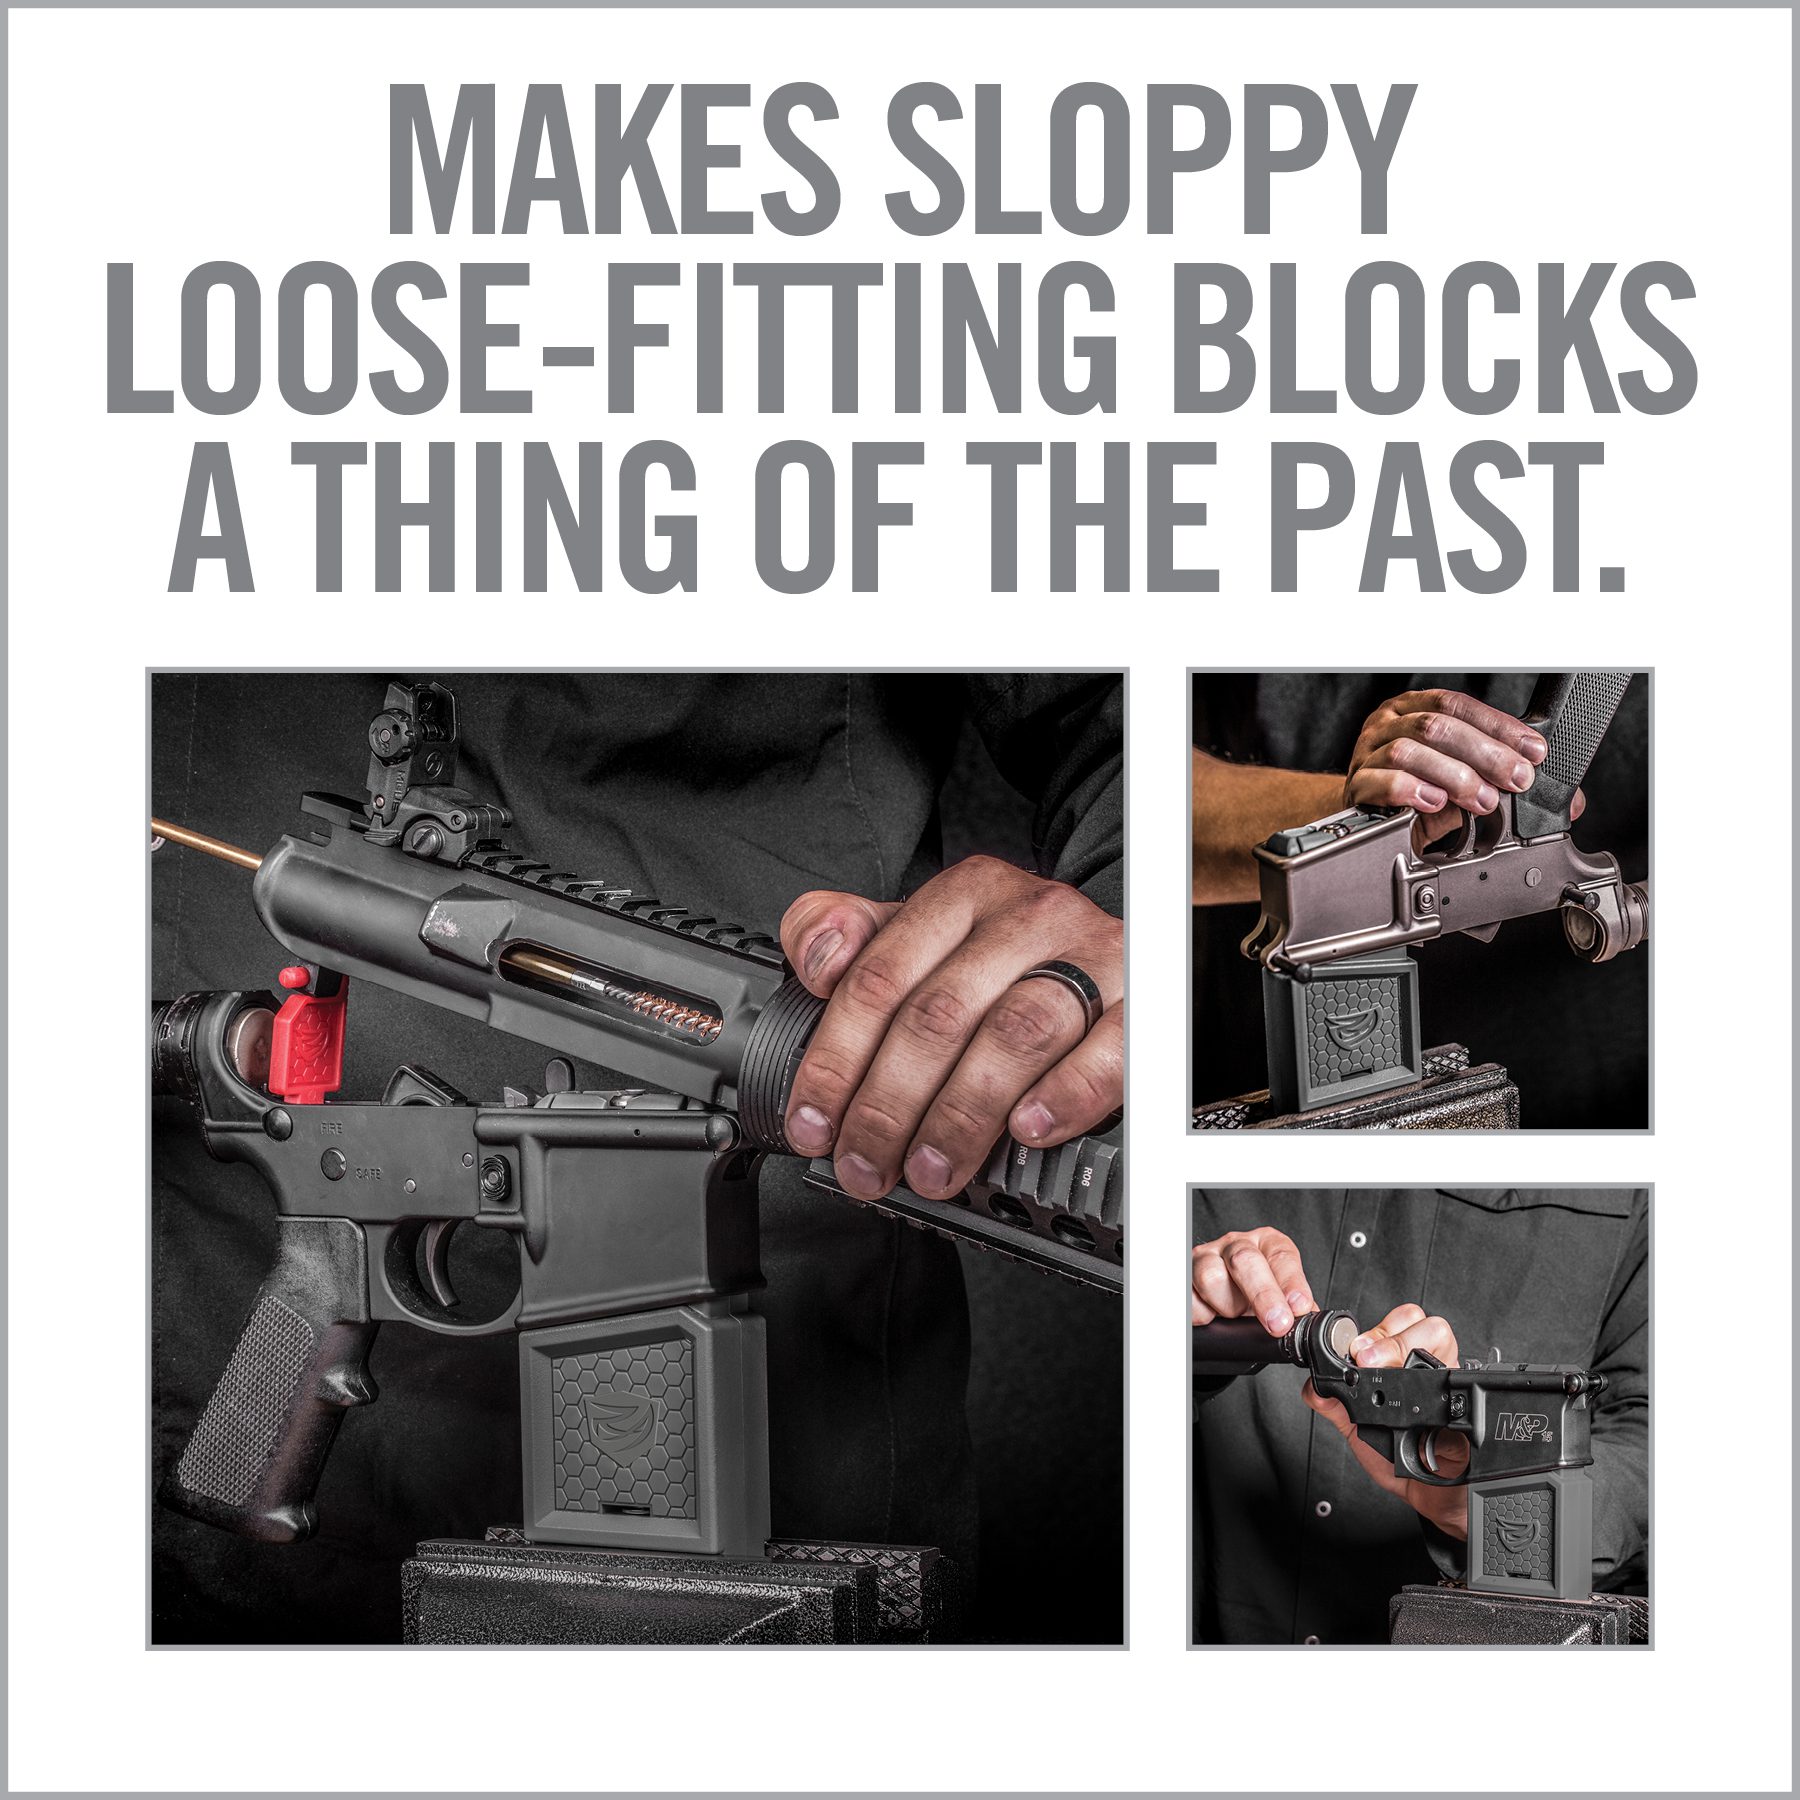 a man is holding a gun with the words make sloppy lose - fitting blocks a thing of the past